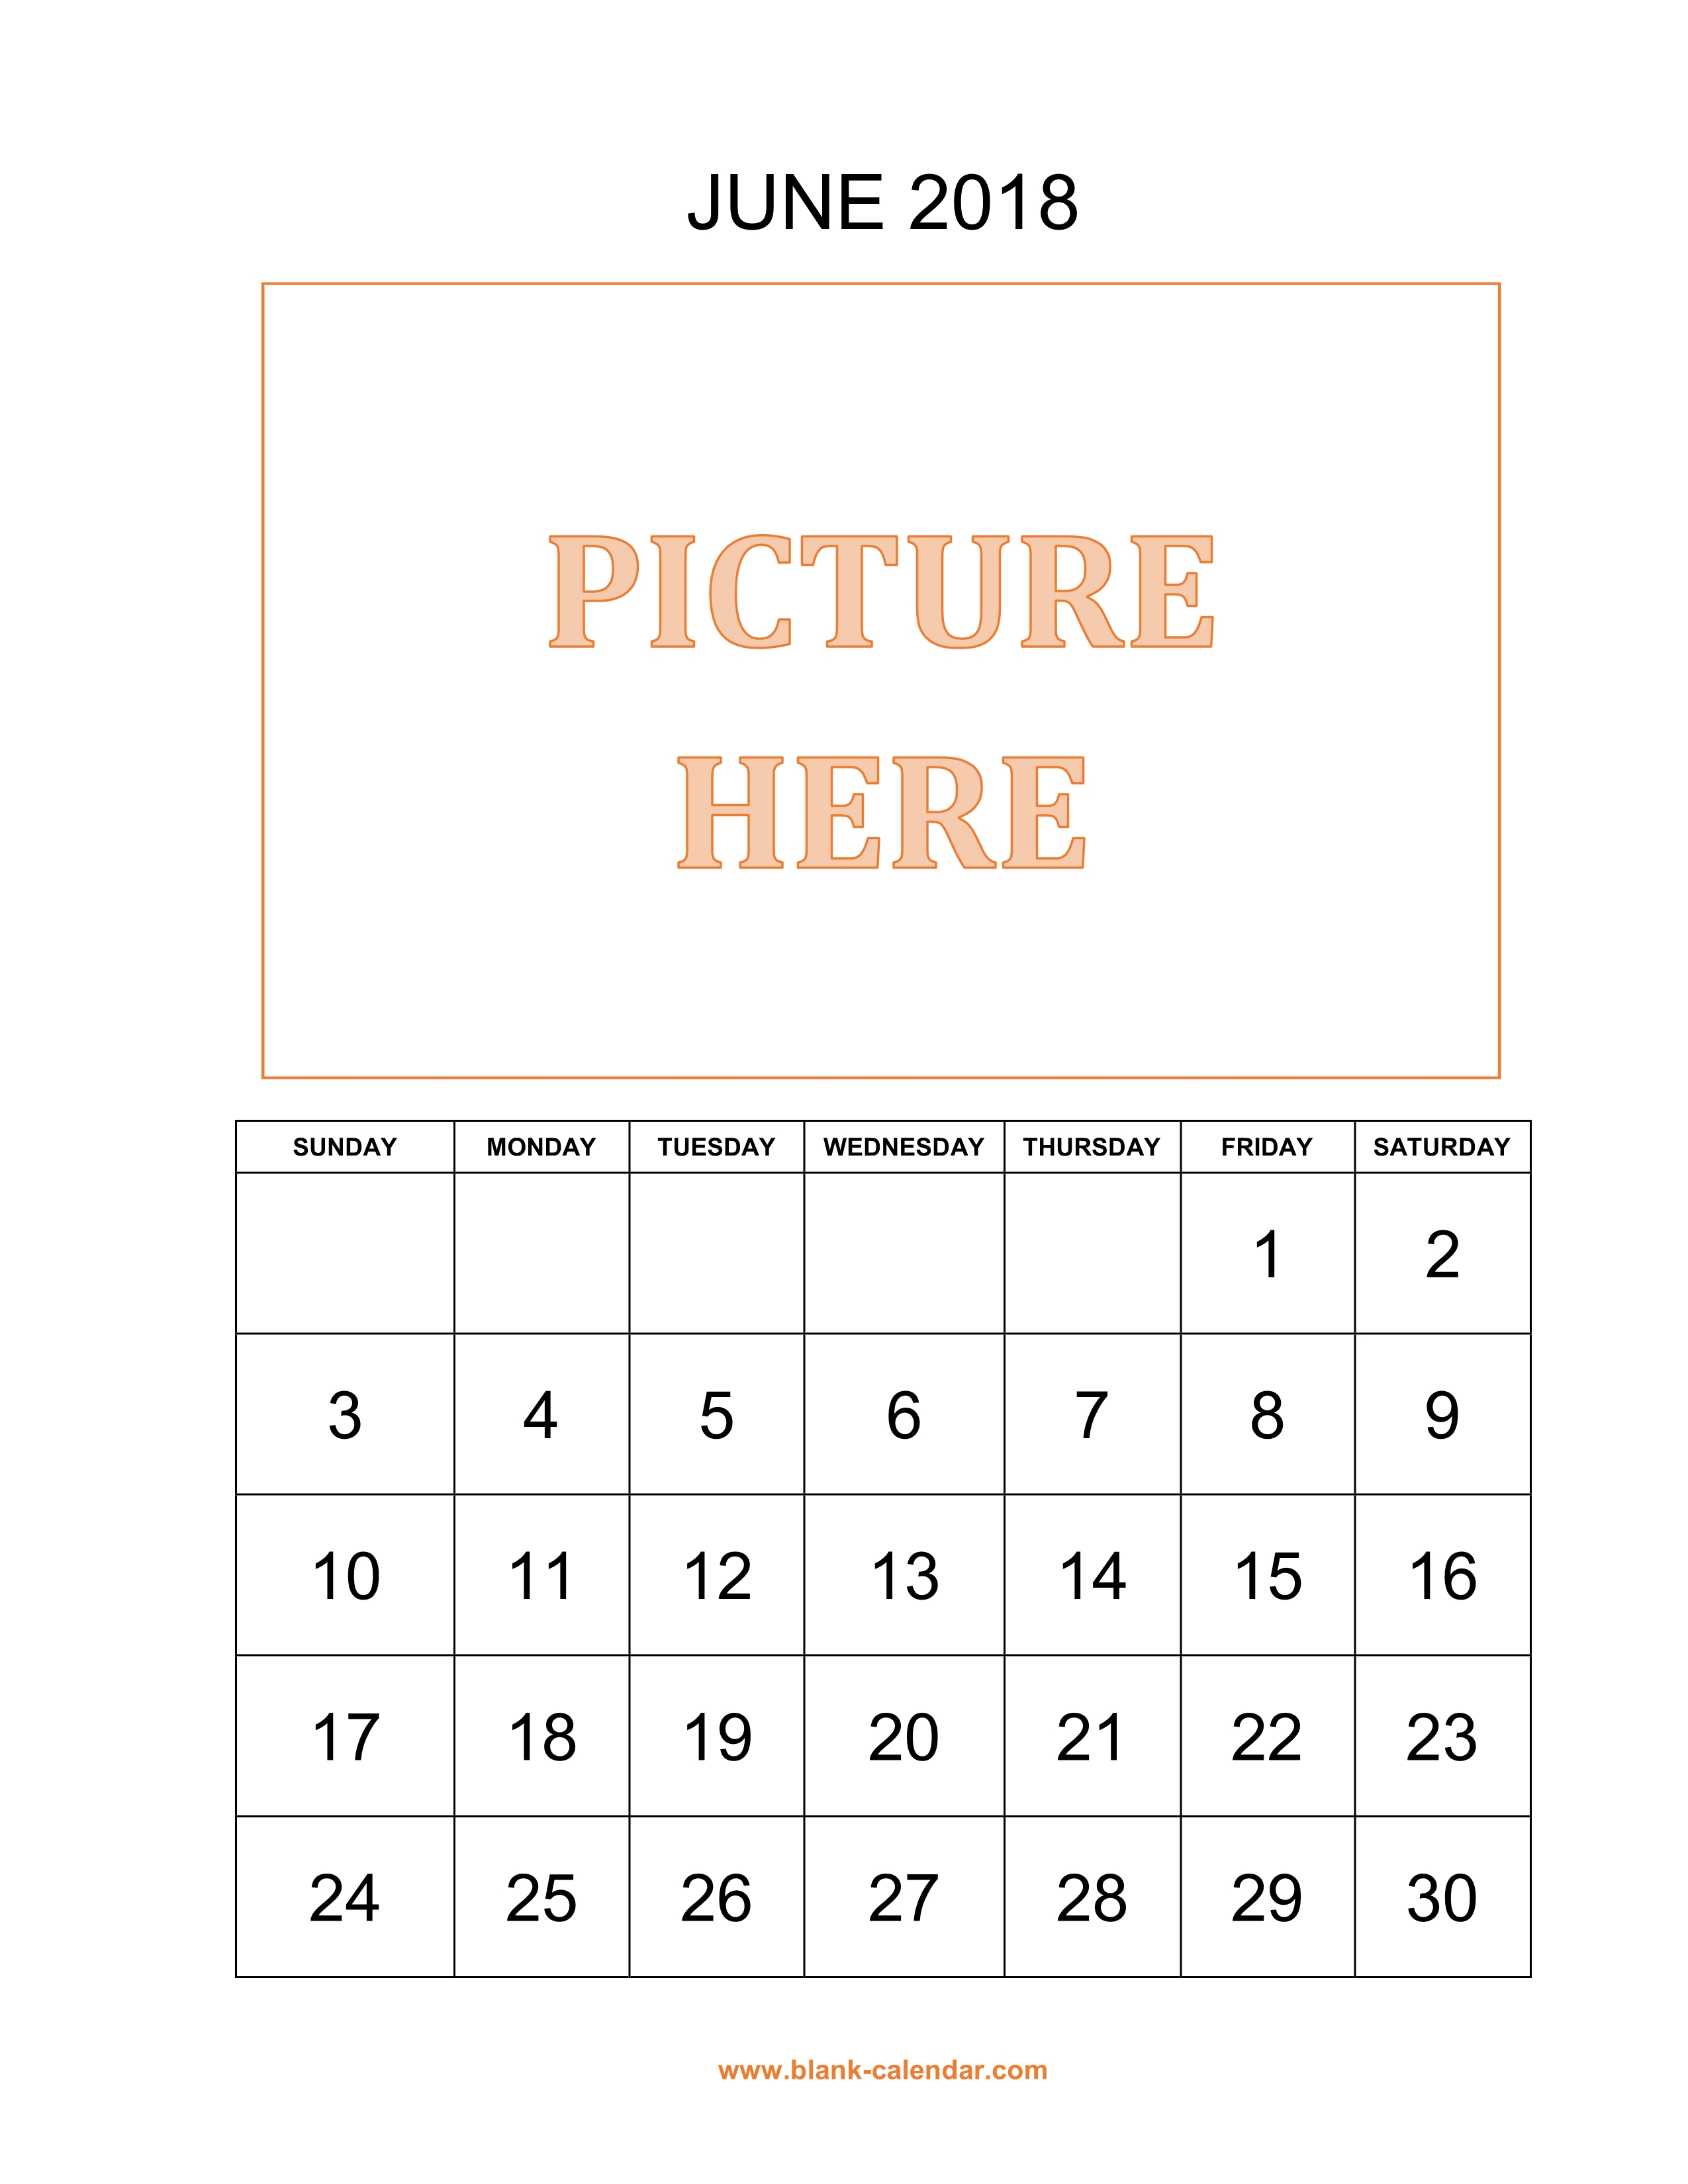 free-download-printable-june-2018-calendar-pictures-can-be-placed-at